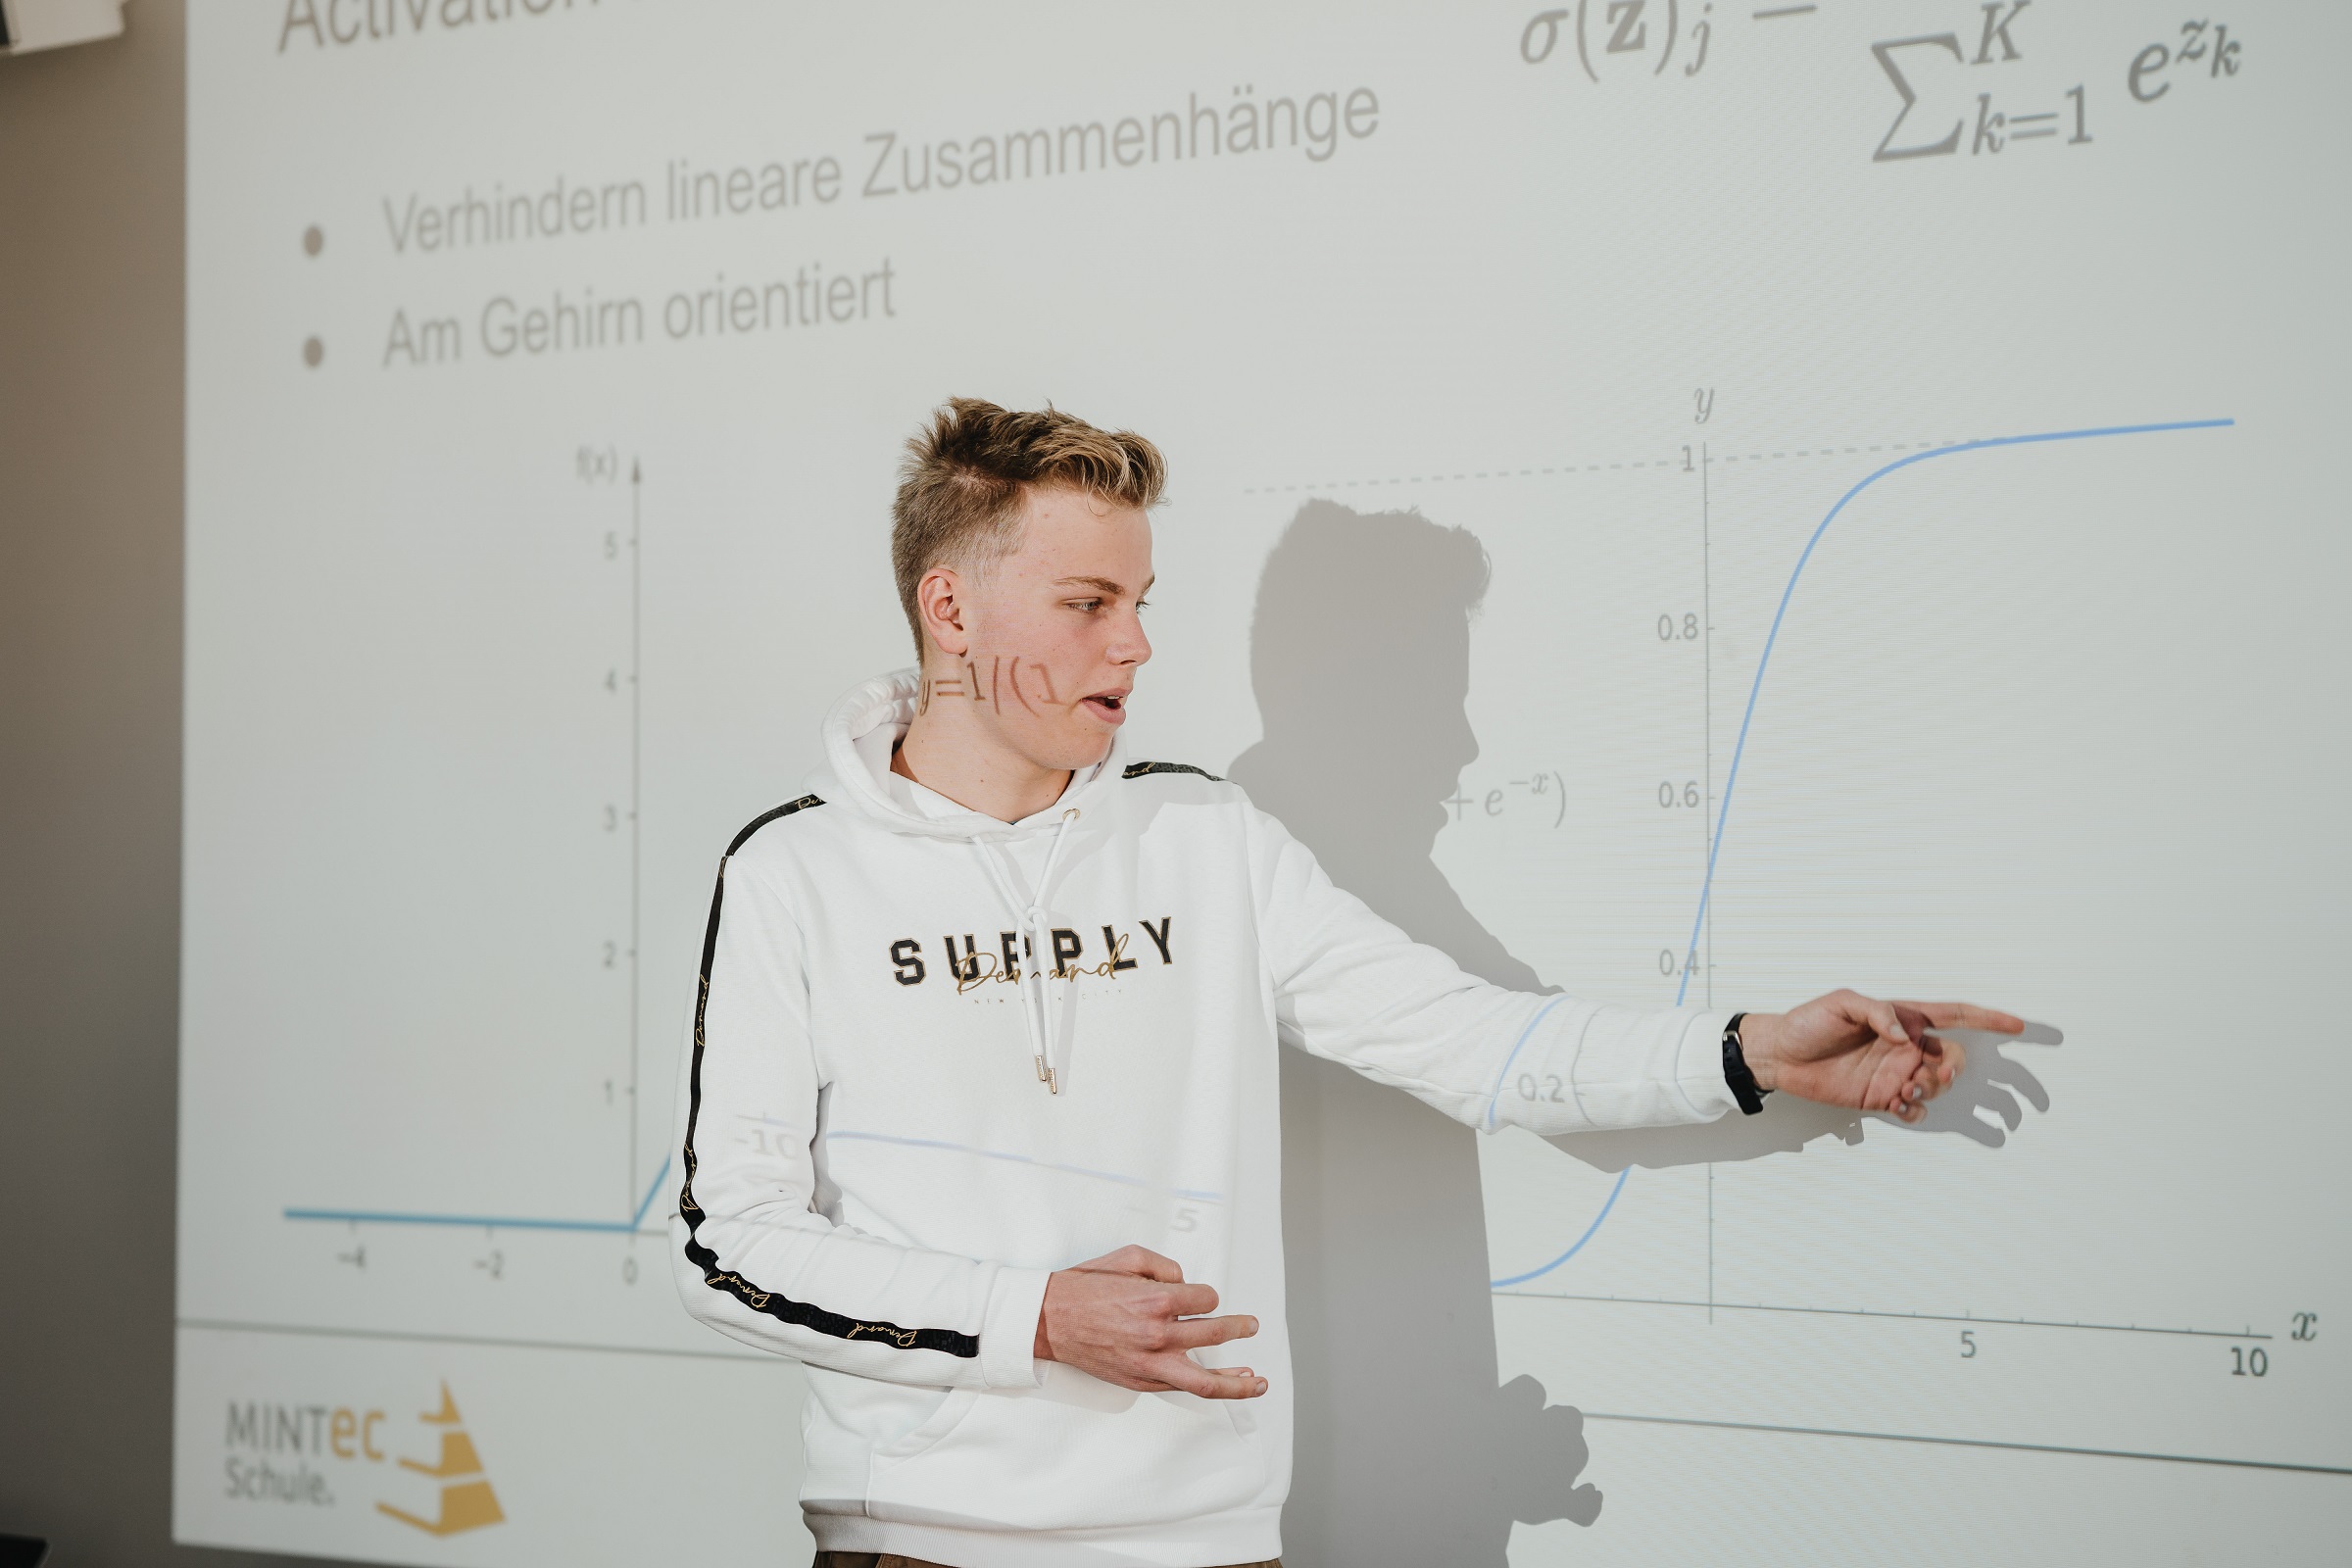 Photograph of a boy pointing towards a graph on a presentation slide that is projected against a wall